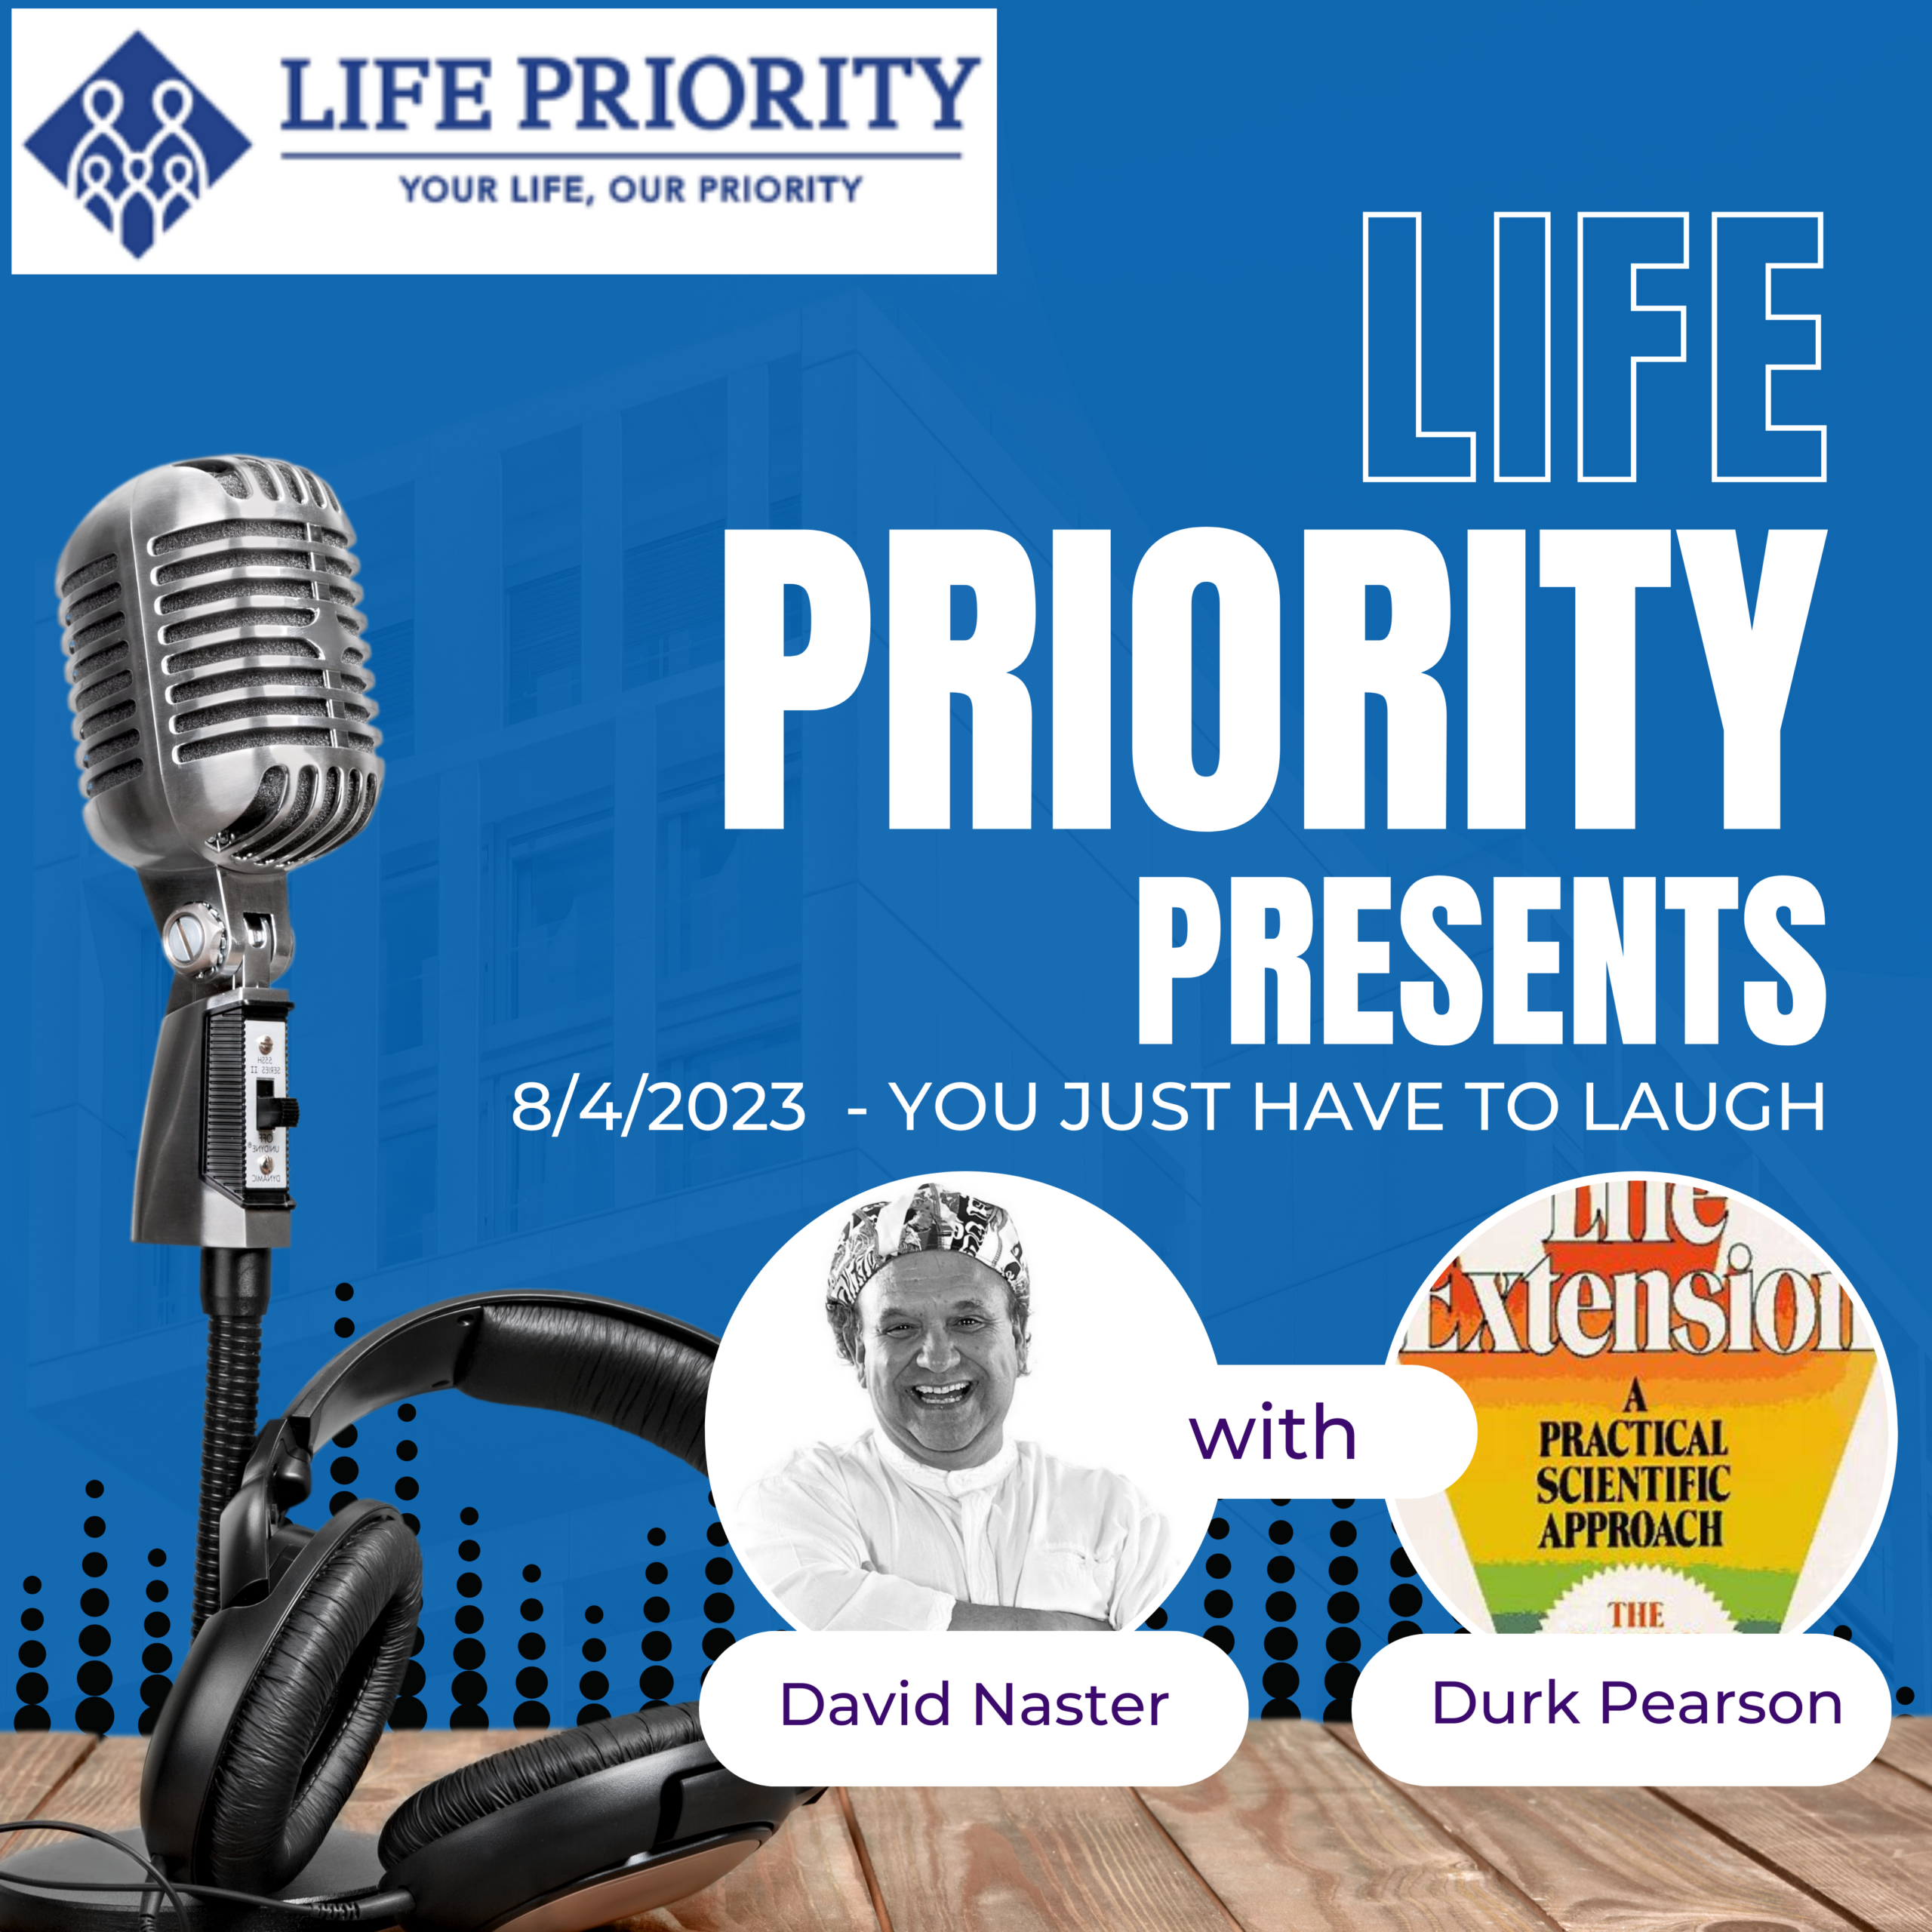 Life Priority David Naster and Durk Pearson